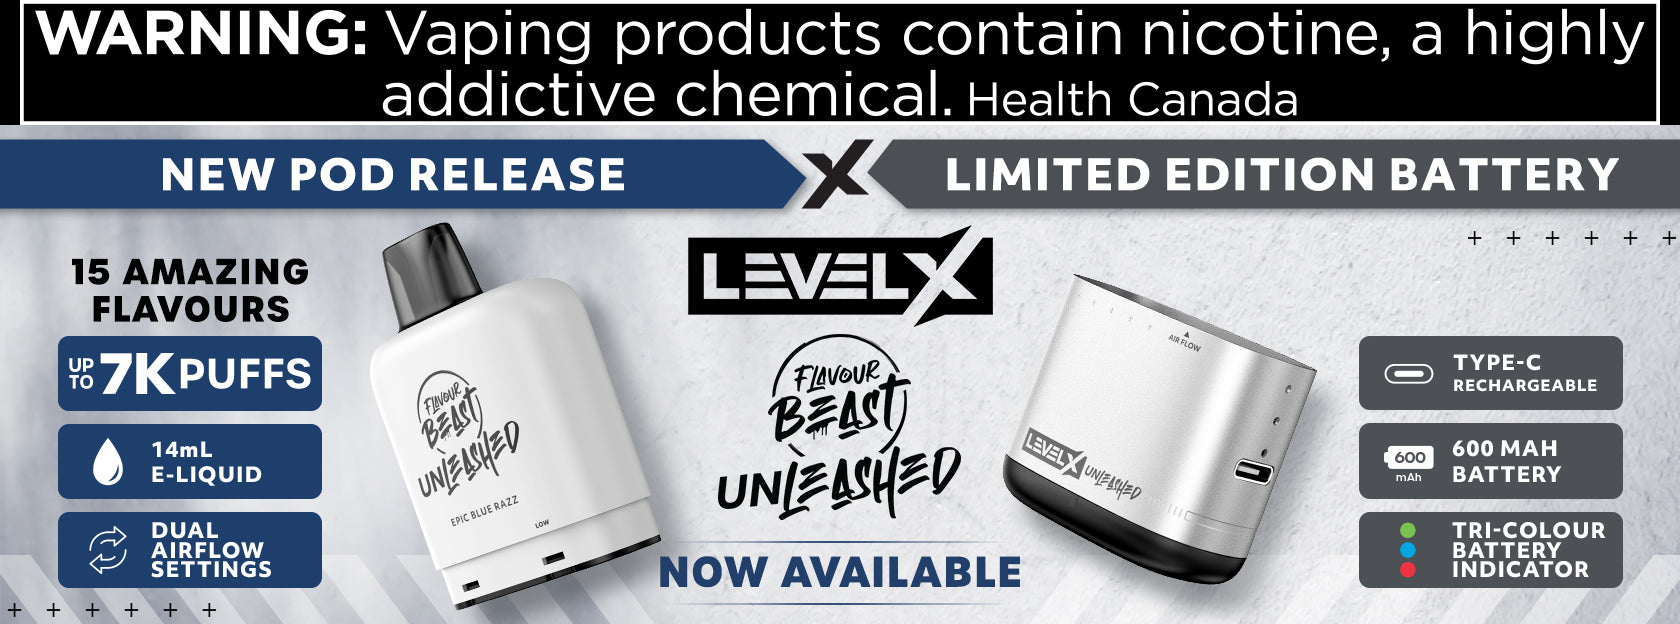 Flavour Beast Unleashed Level X Pods